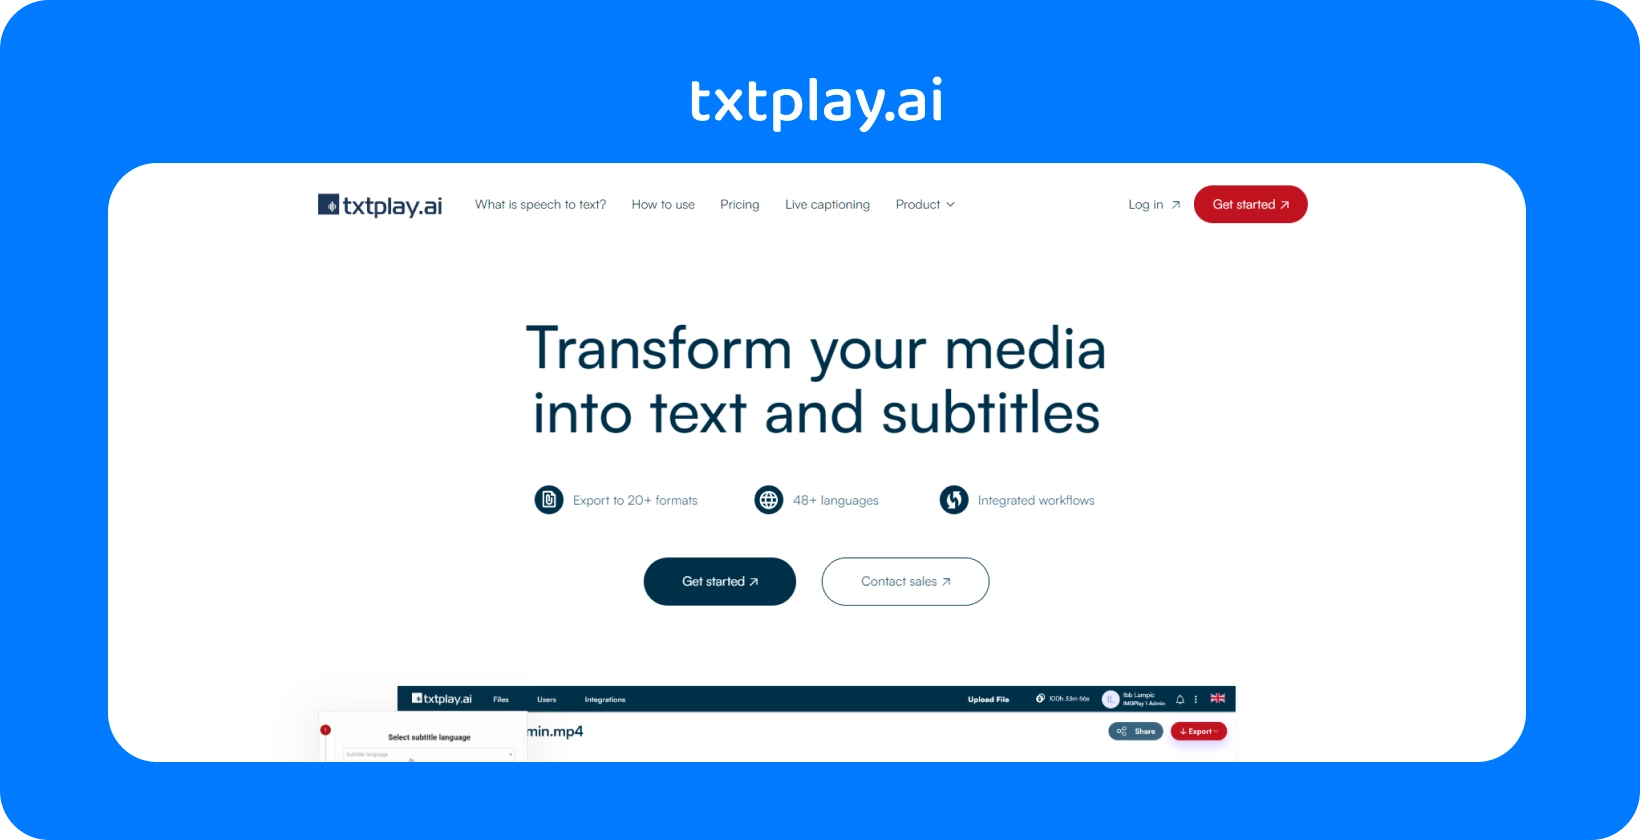 Transform the media into text and subtitles with txtplay.ai, supporting 48+ languages and 20+ formats.